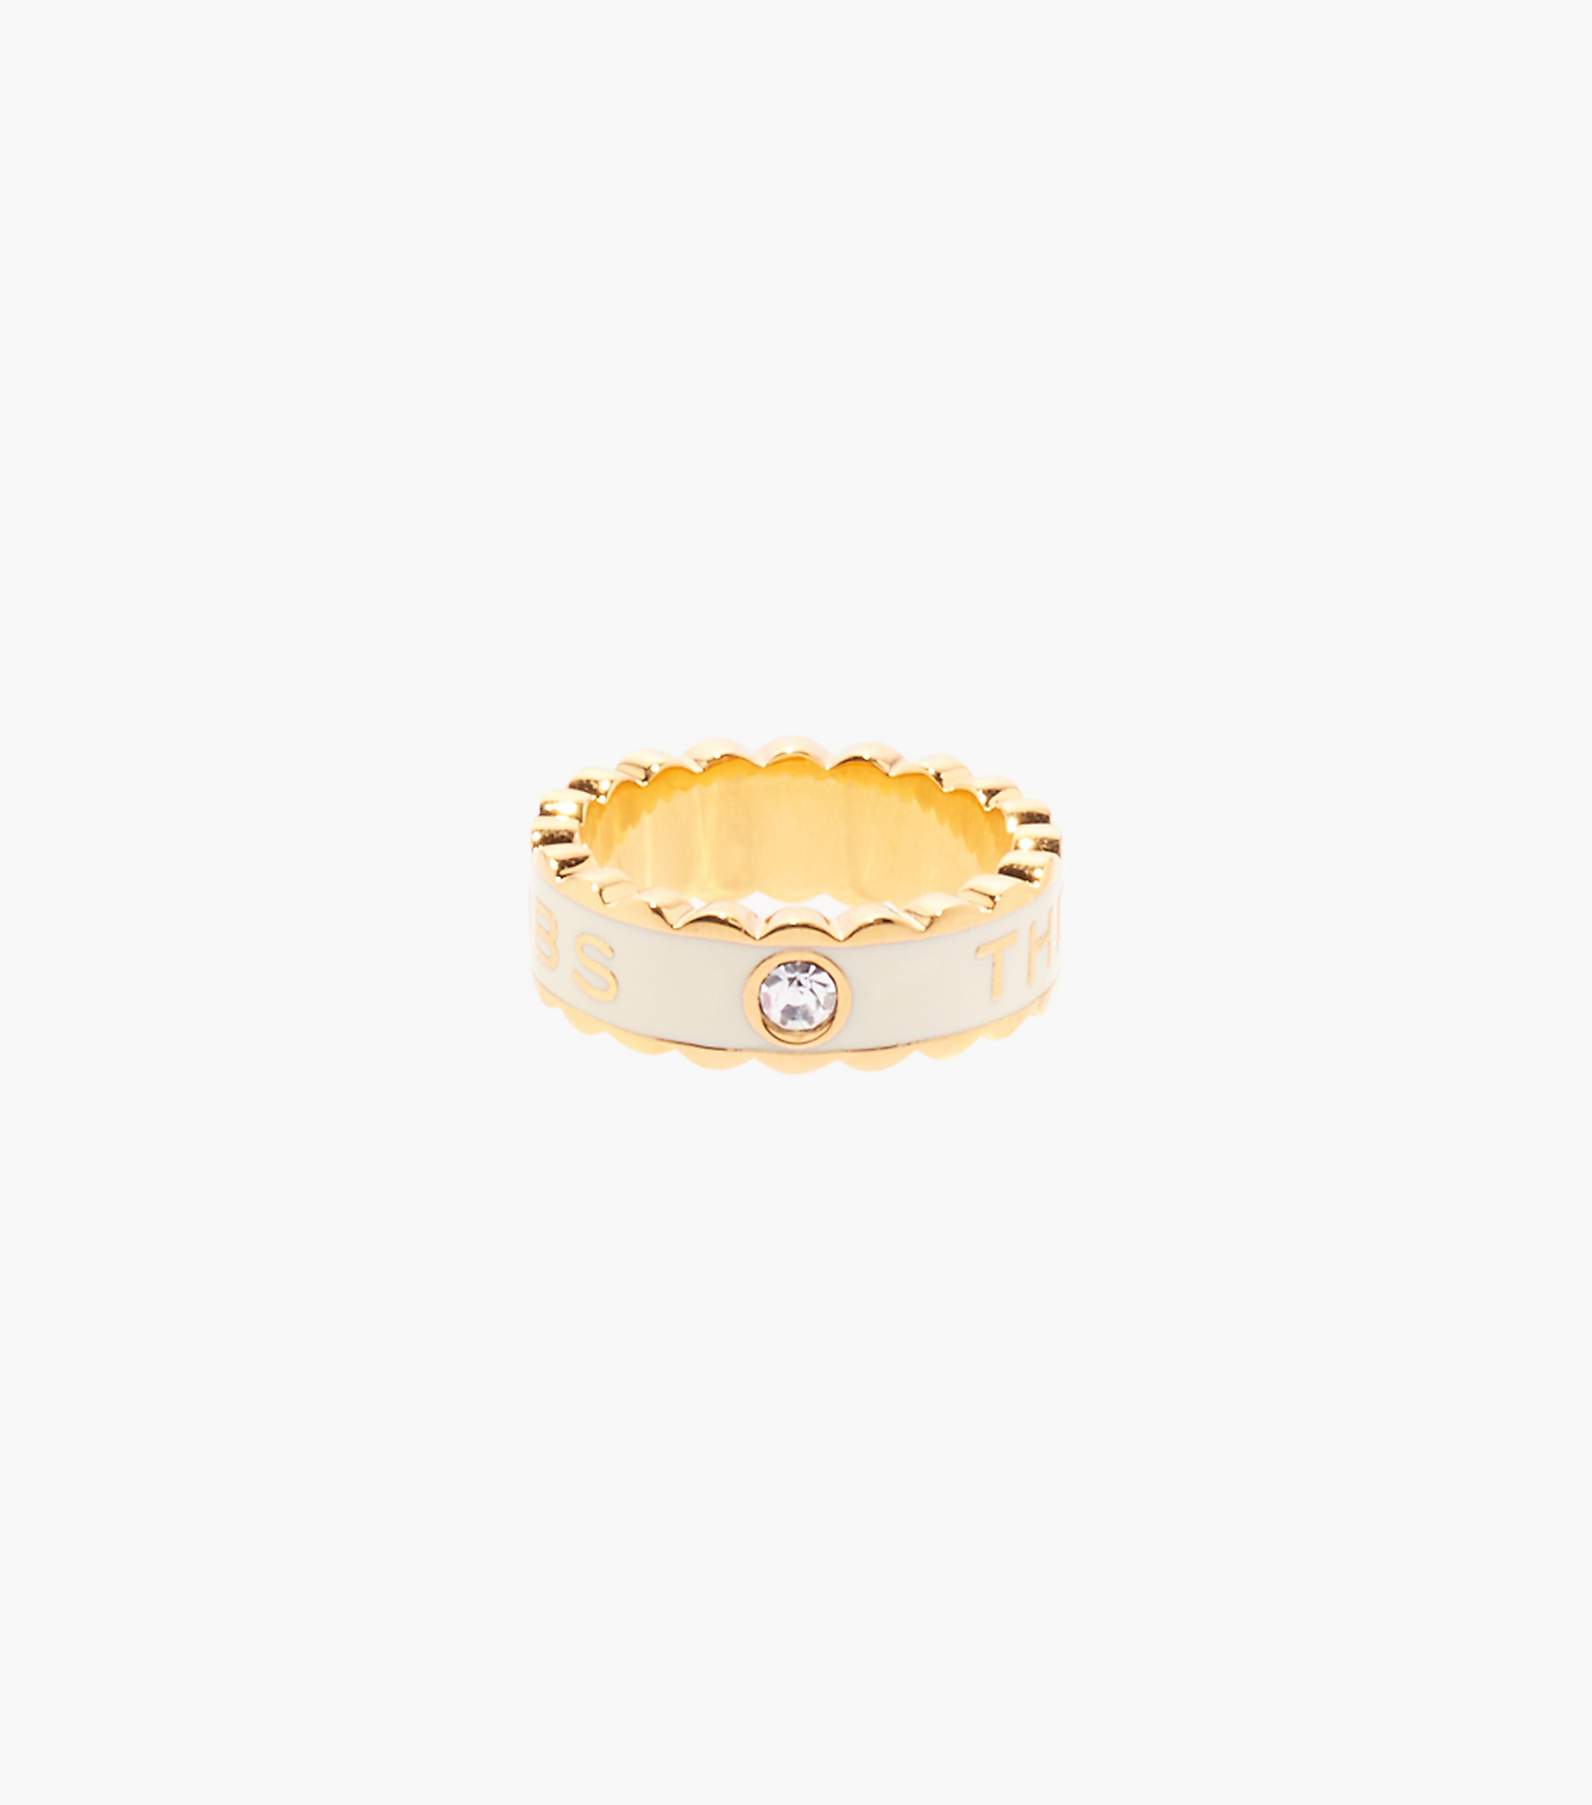 Louis Vuitton Authenticated Gold Ring